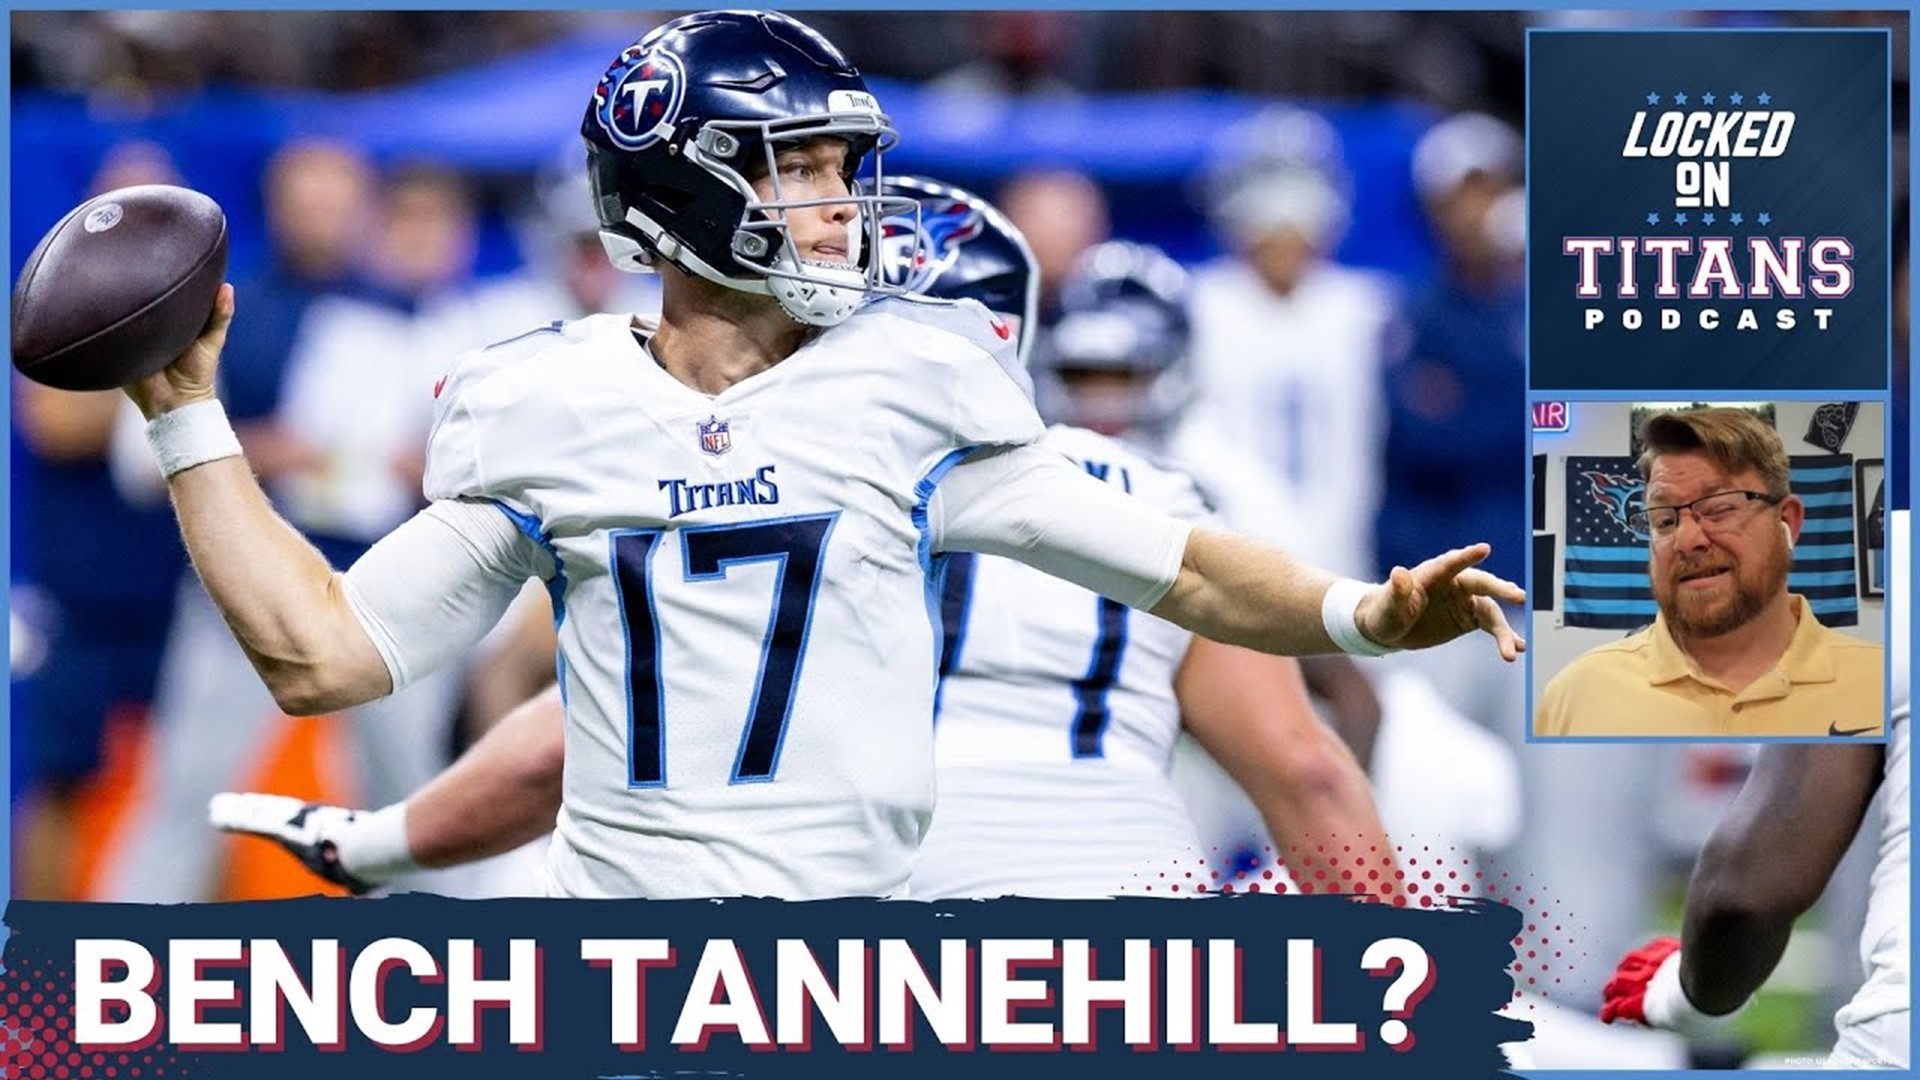 The Tennessee Titans starting quarterback Ryan Tannehill struggled mightily in the Titans loss to the New Orleans Saints, but it was even worse on film.